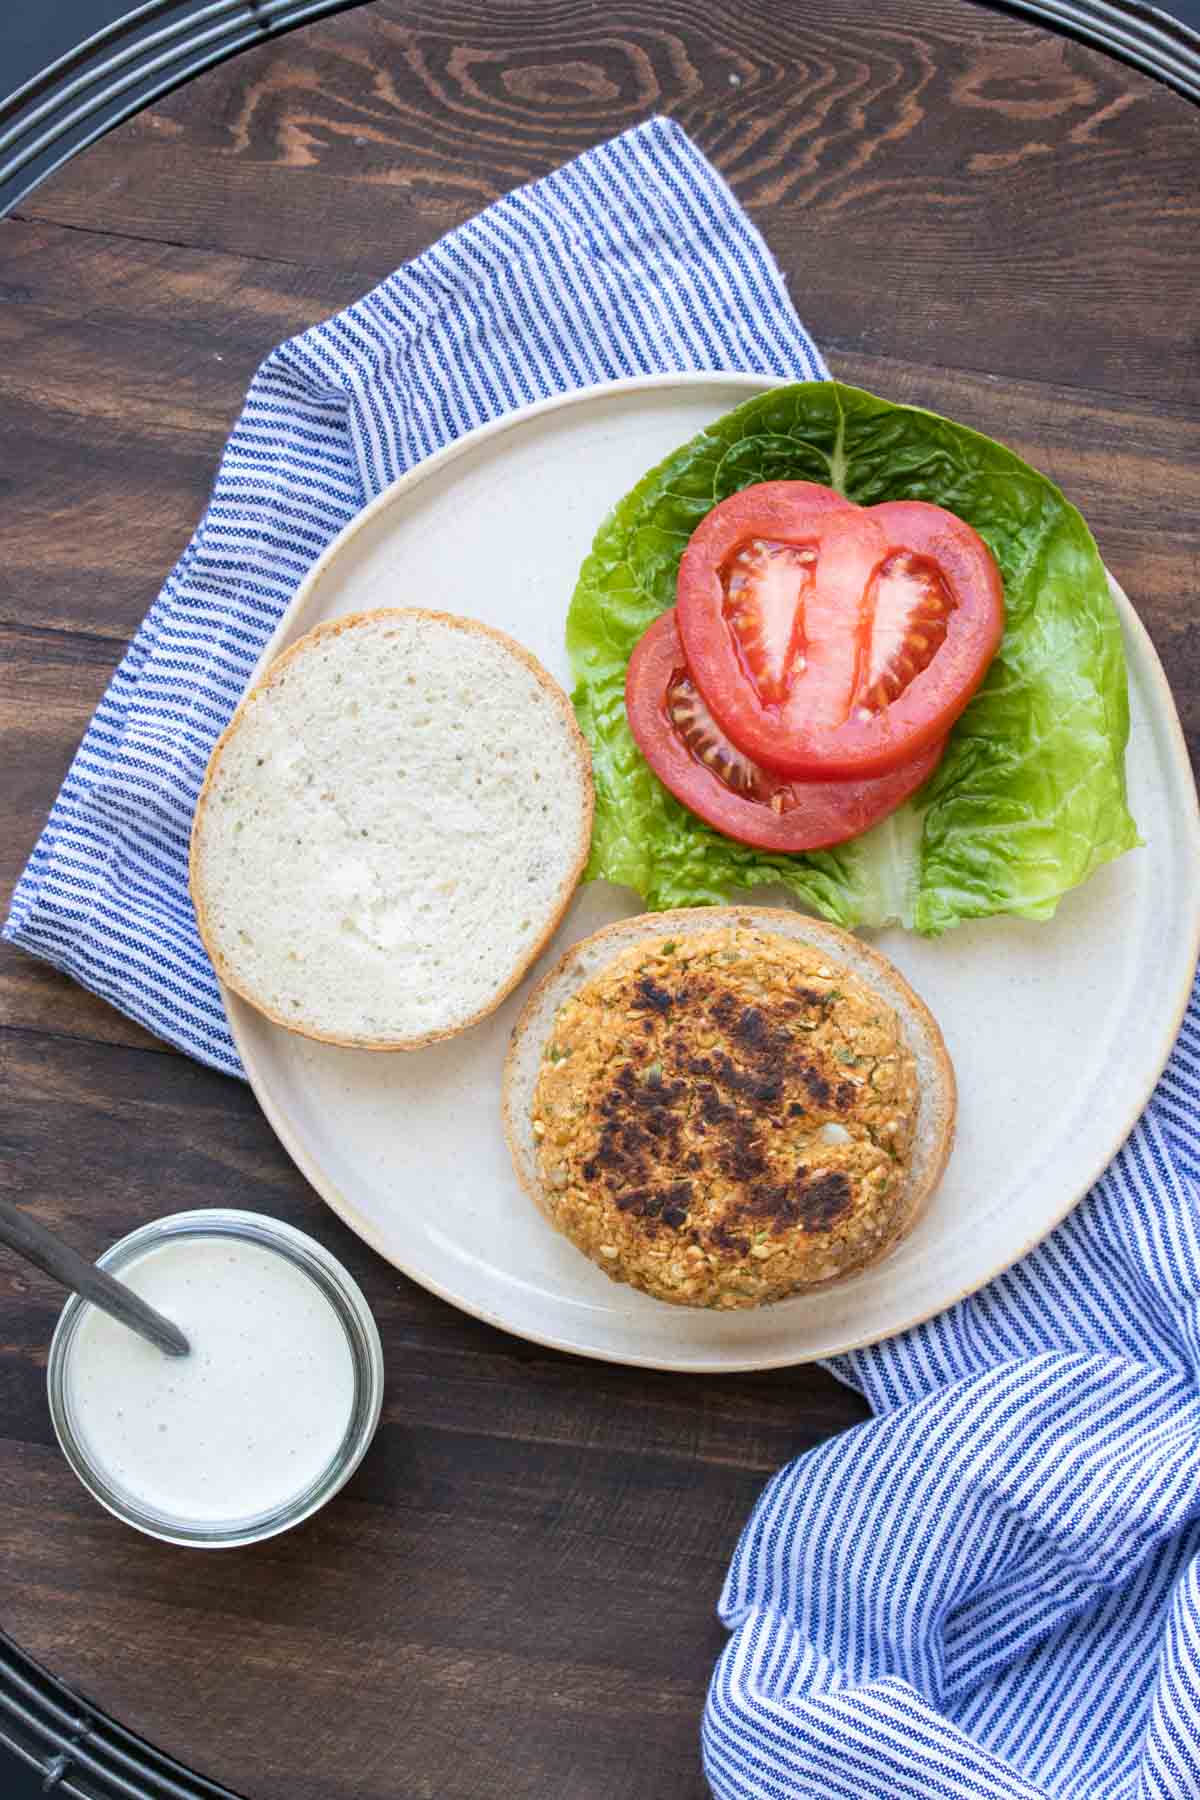 Open face chickpea burger on a bun next to lettuce, tomato and sauce.